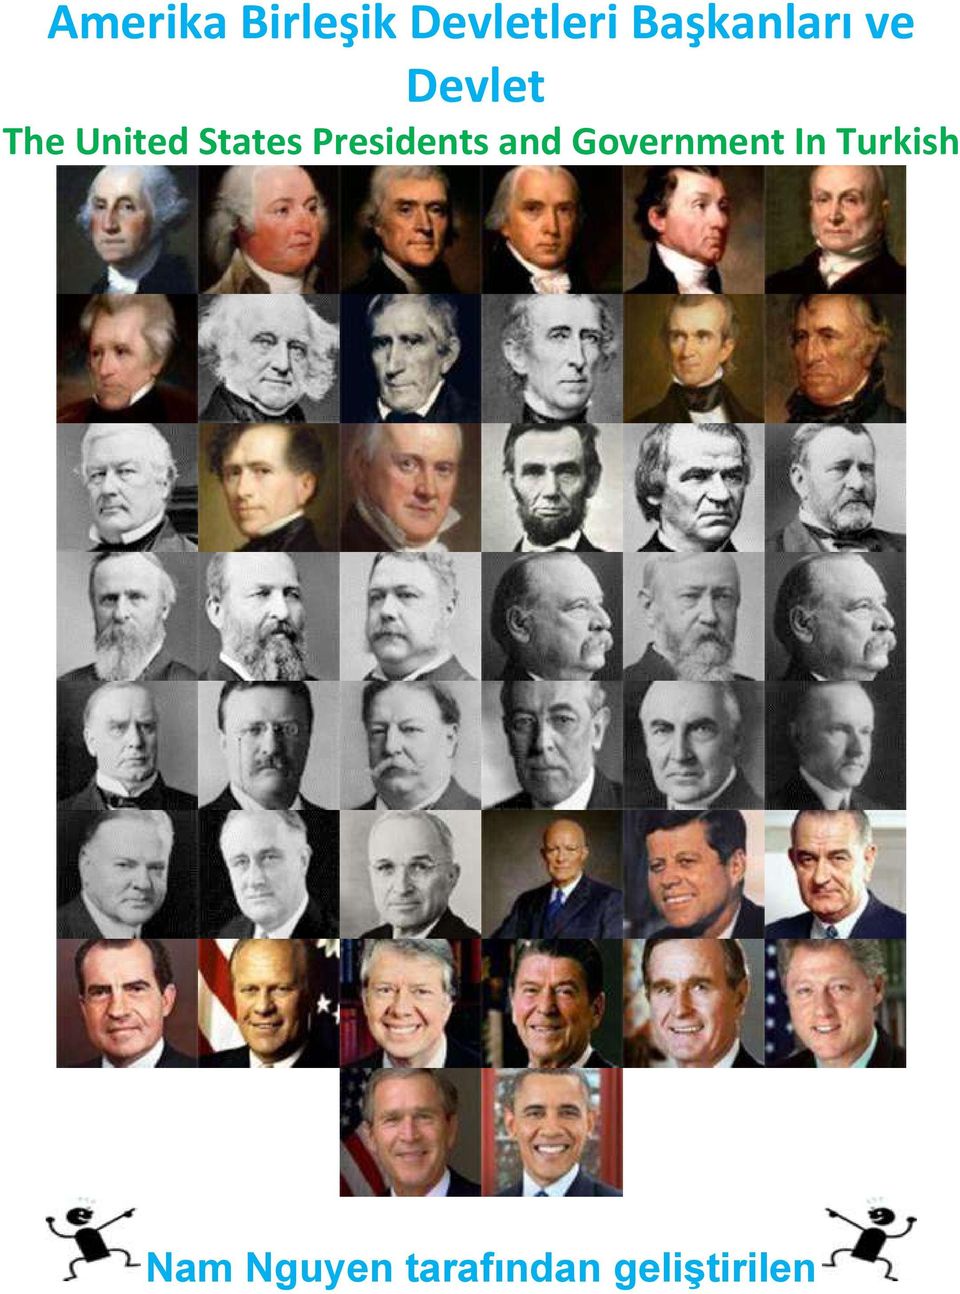 States Presidents and Government